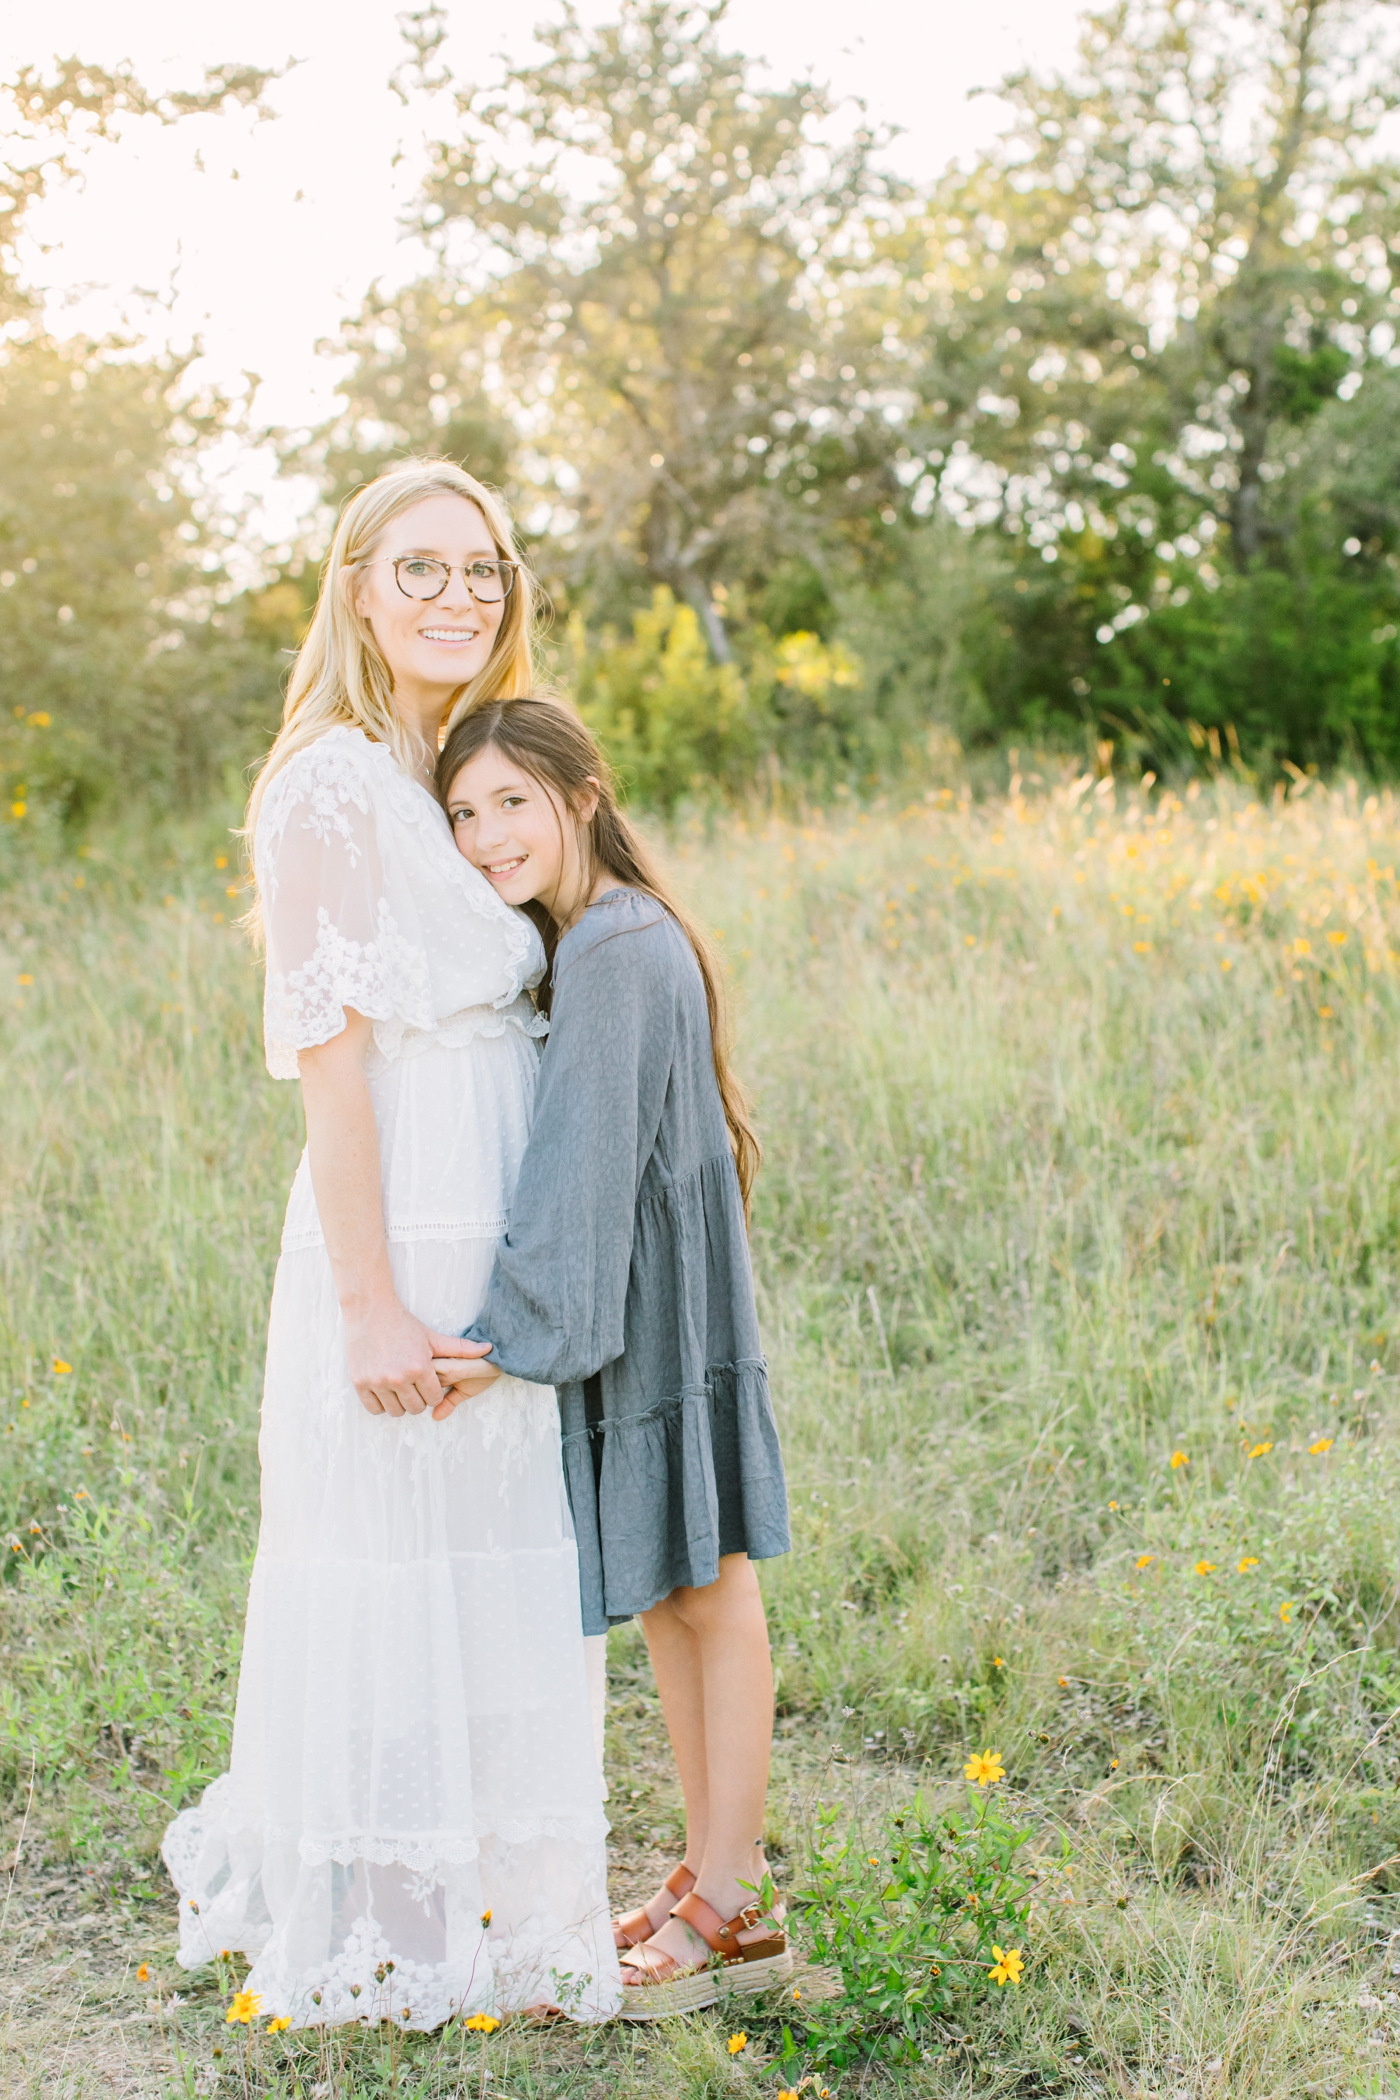 Mom with older daughter during sunny field session in Austin, TX. Photo by Sana Ahmed Photography